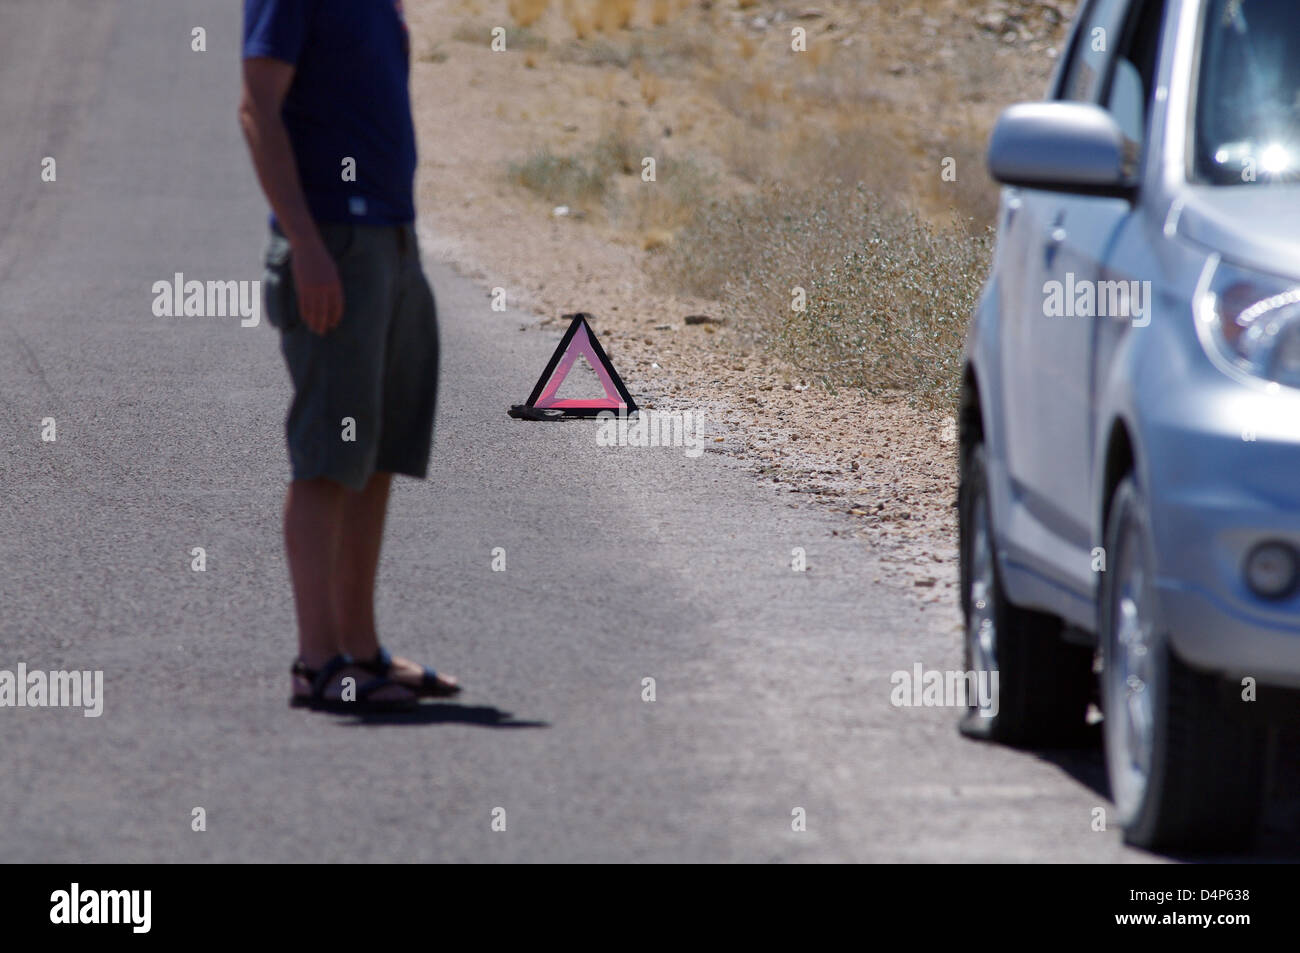 Difficulties abroad: flat tire Stock Photo